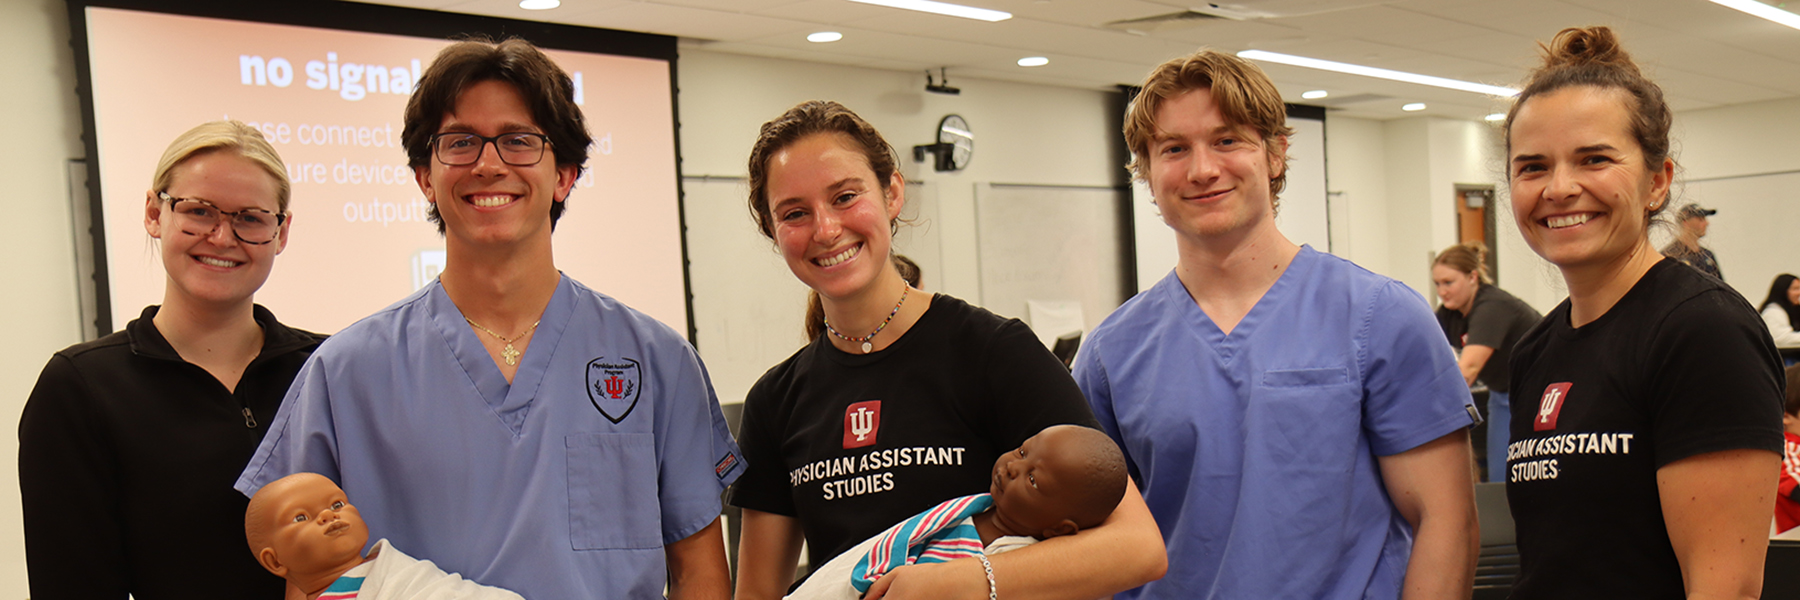 5 PA students posing with simulation babies